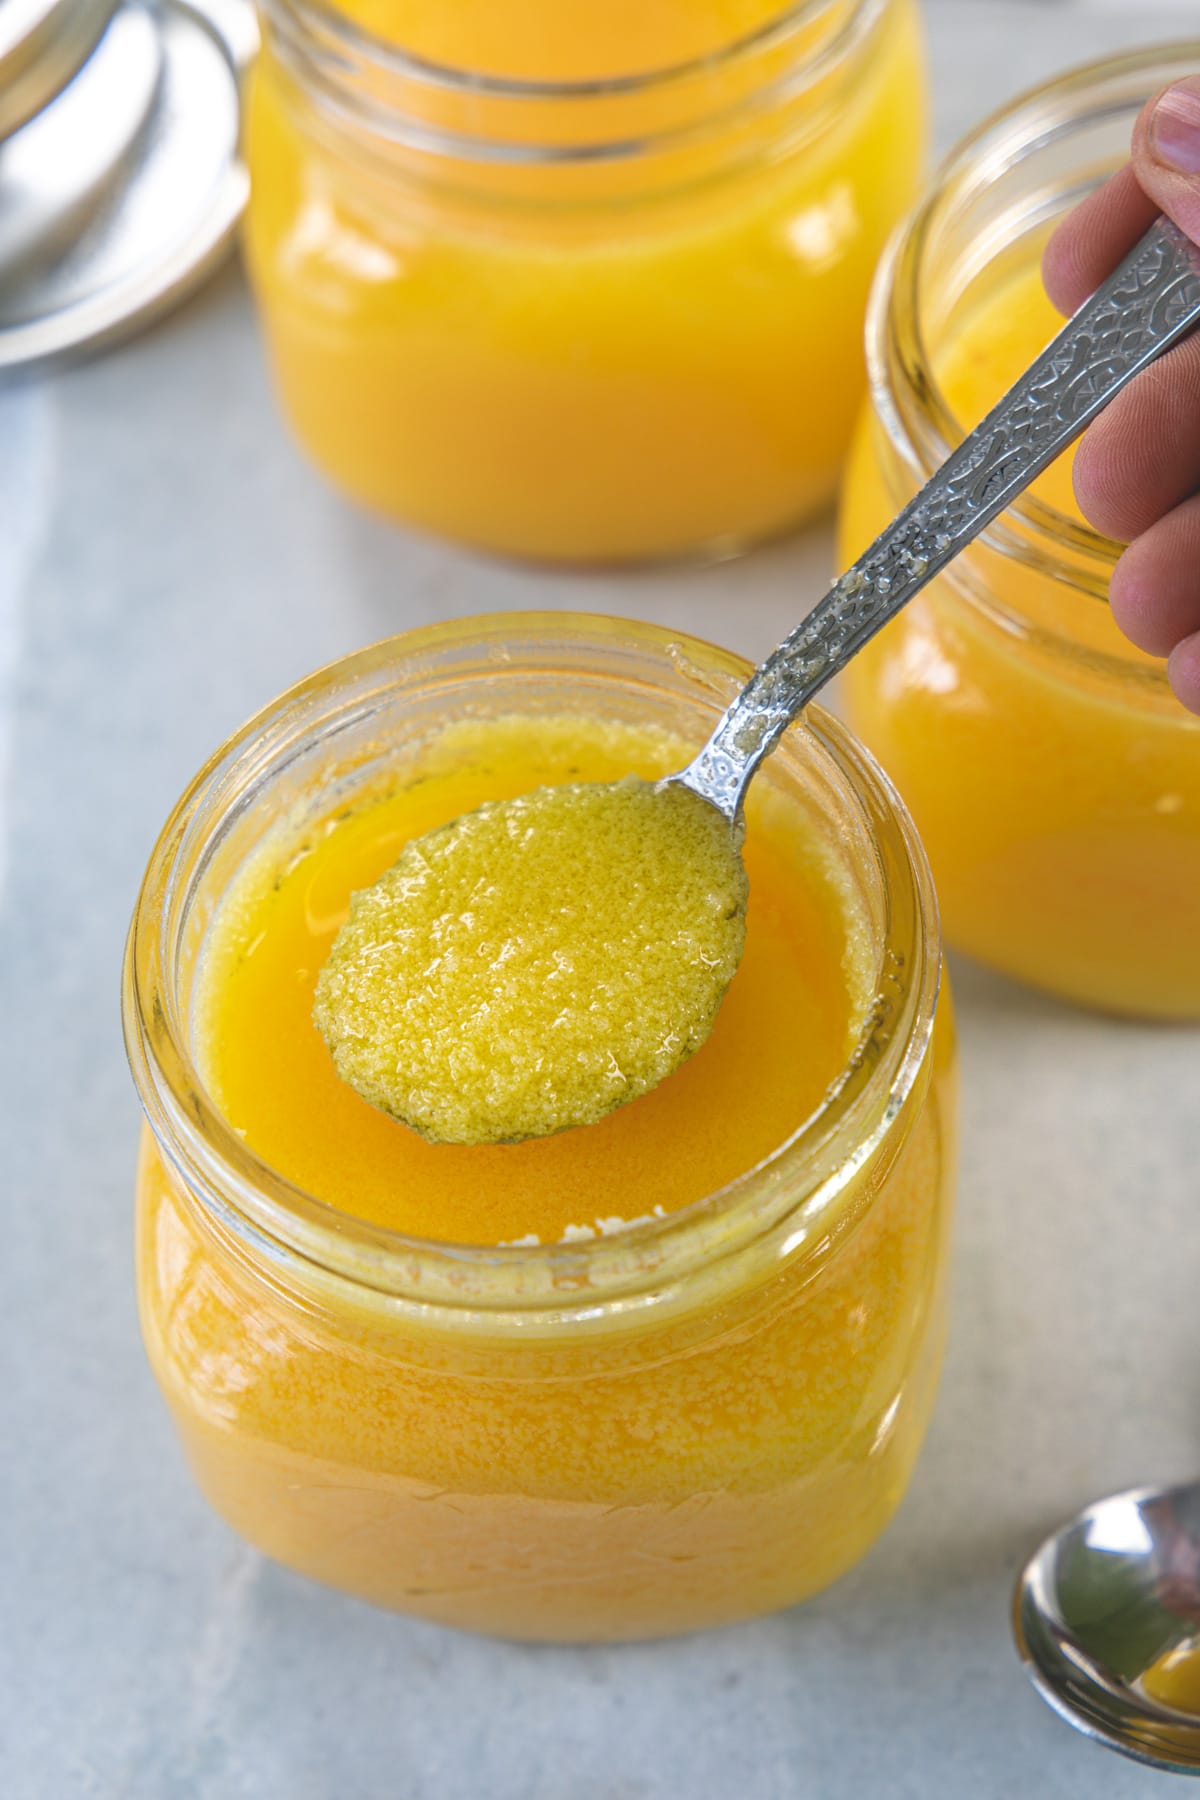 Spoonful of ghee taking from the jar.